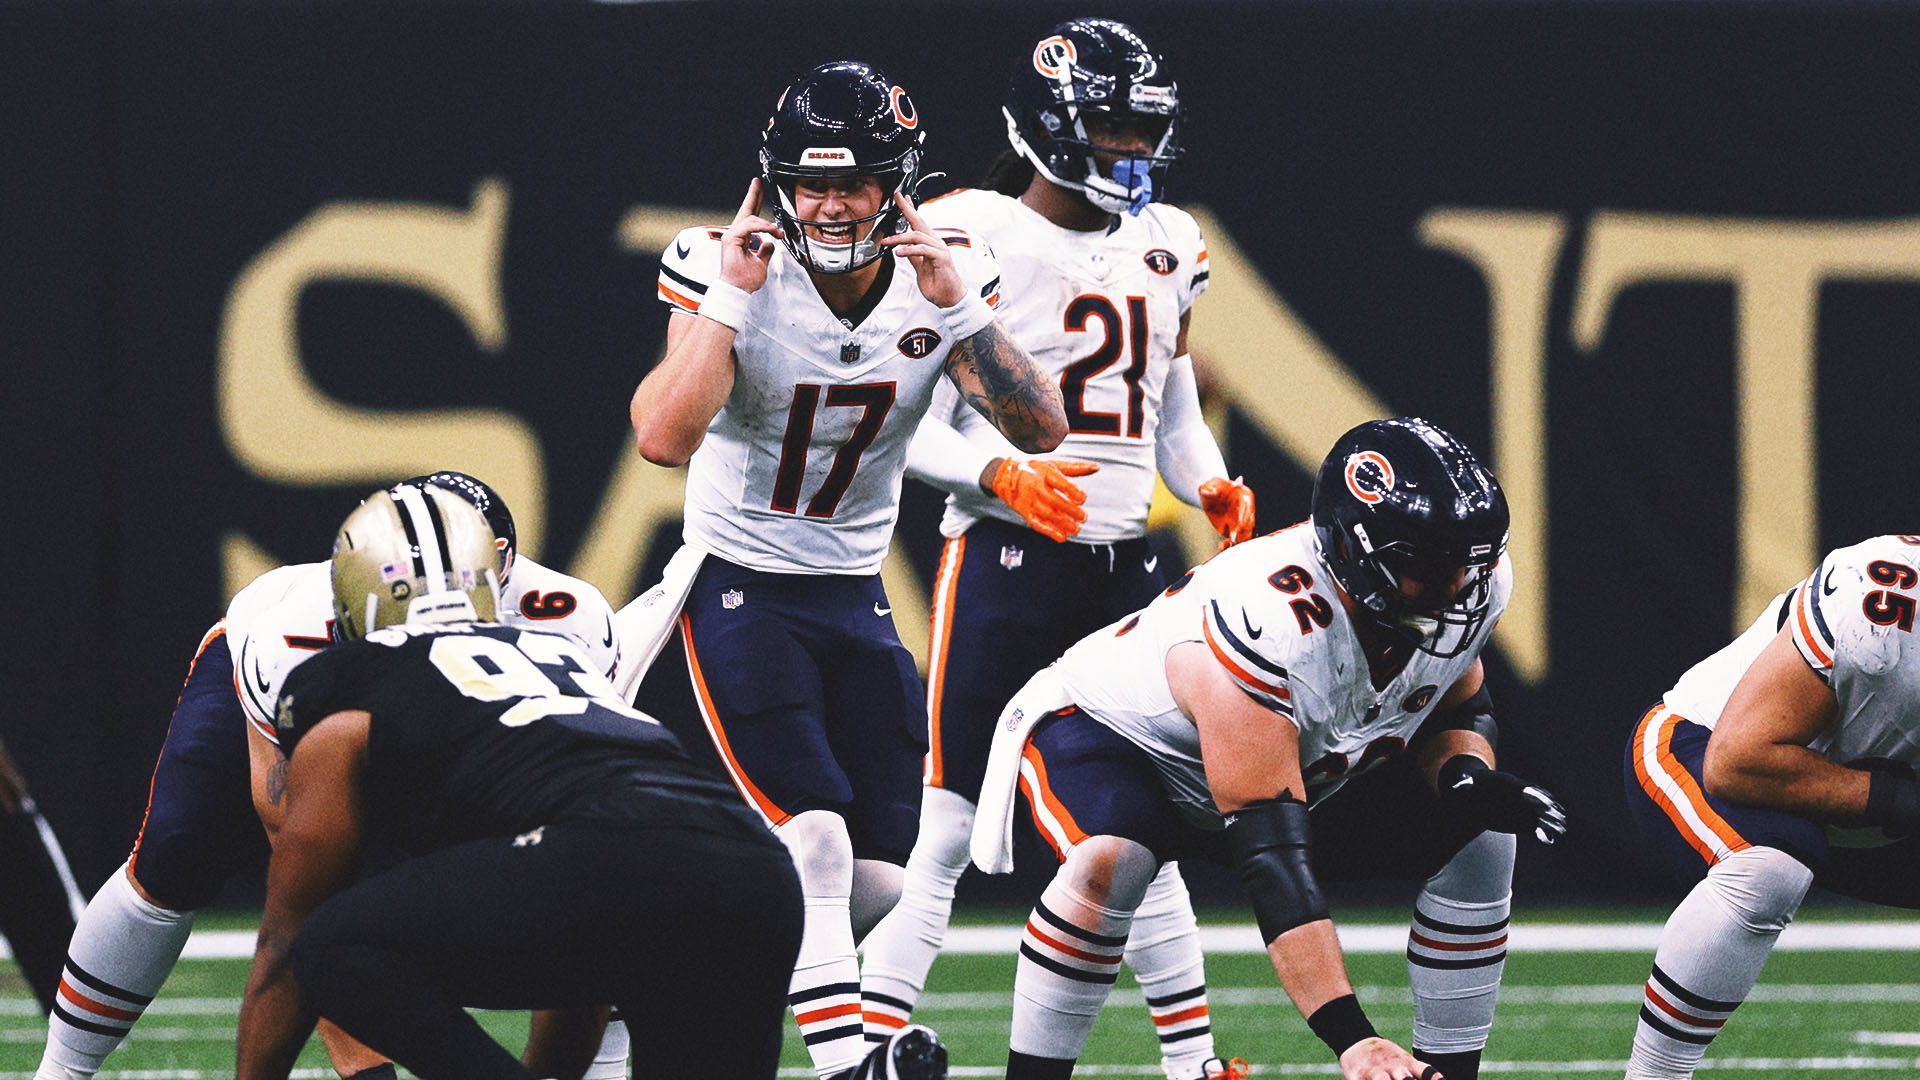 Bagent starts strong, but late breakdowns doom Bears in 24-17 loss to Saints